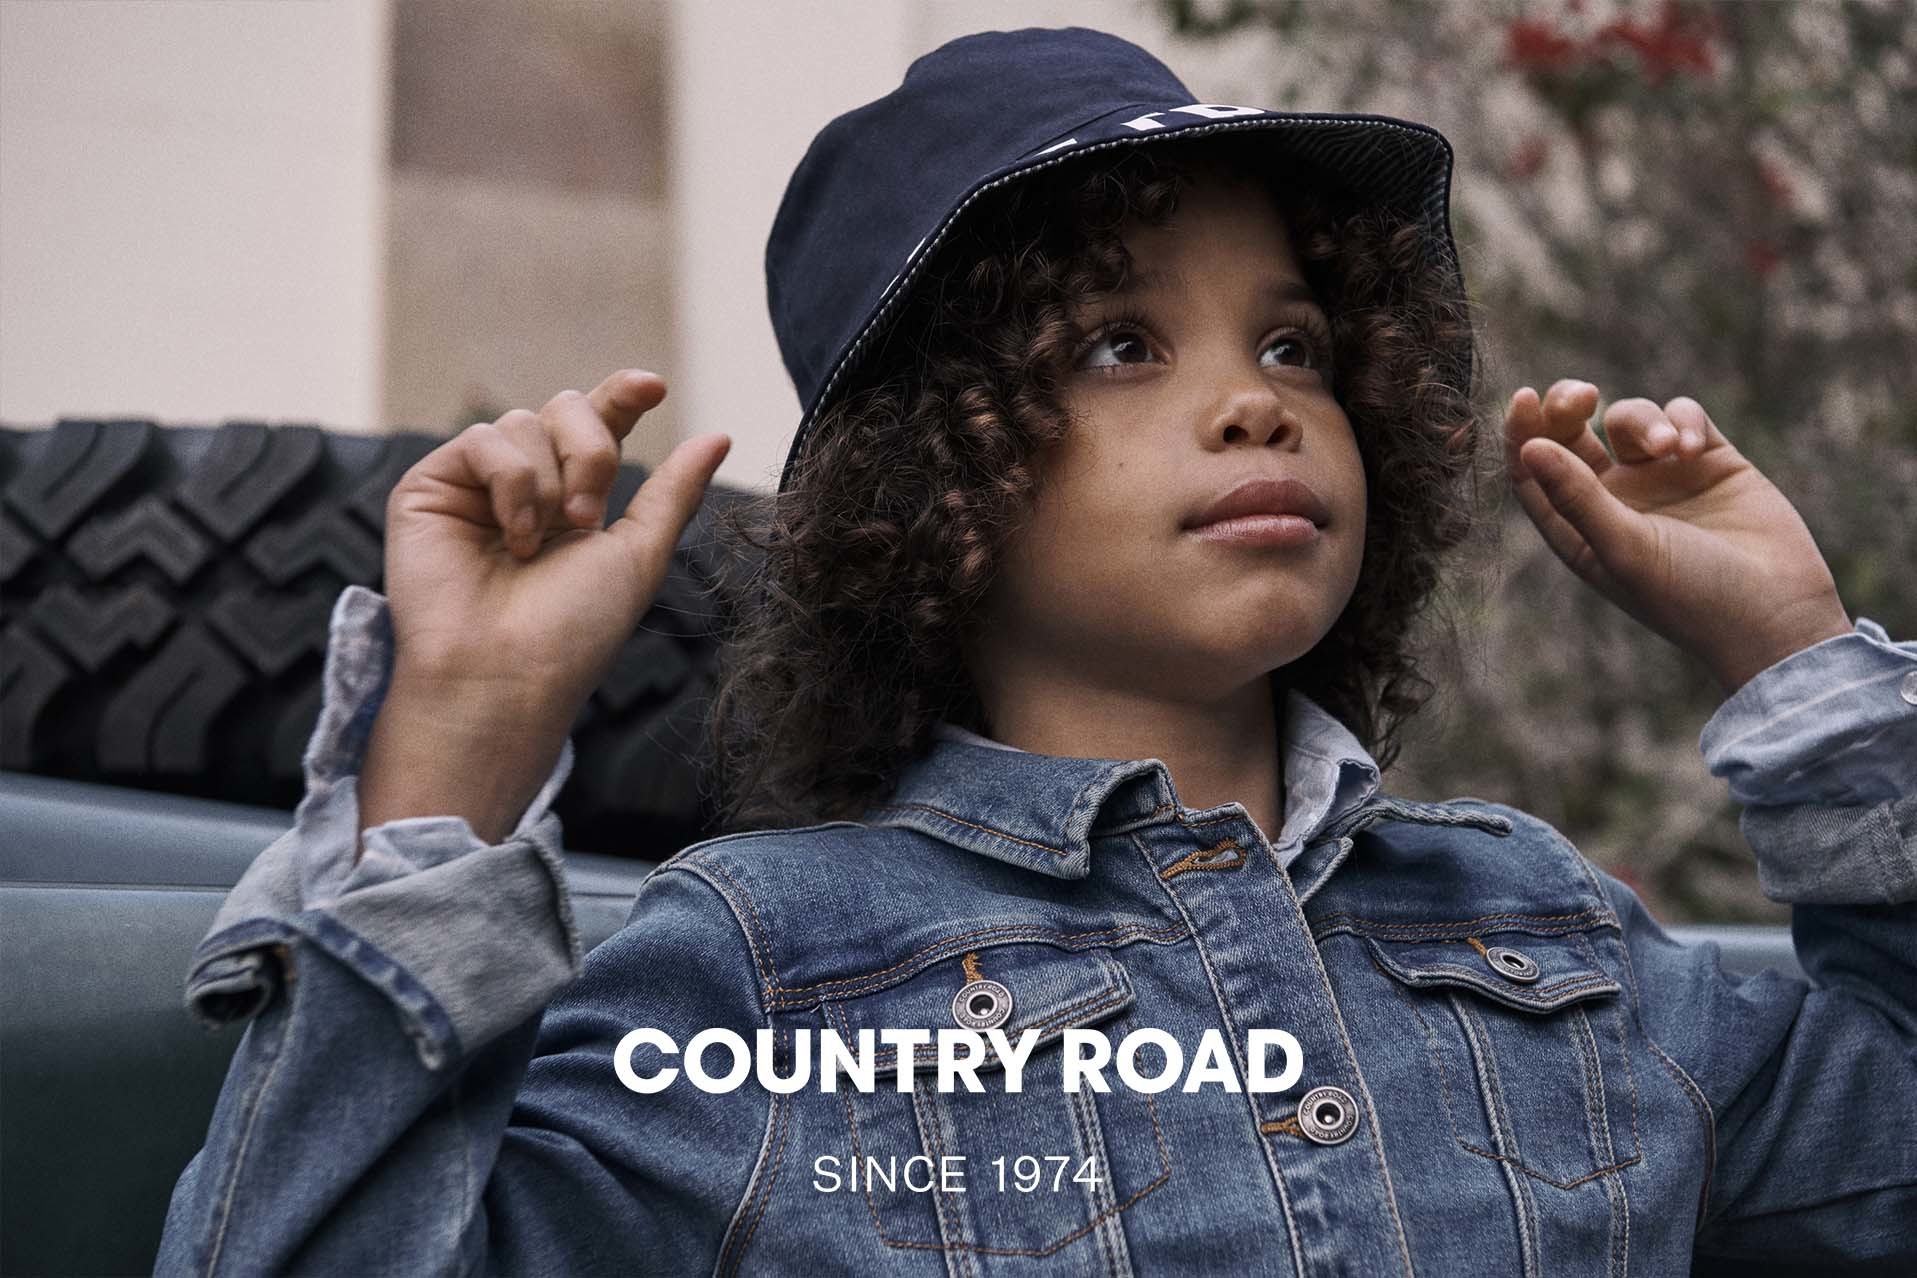 SPRING 19 - COUNTRY ROAD